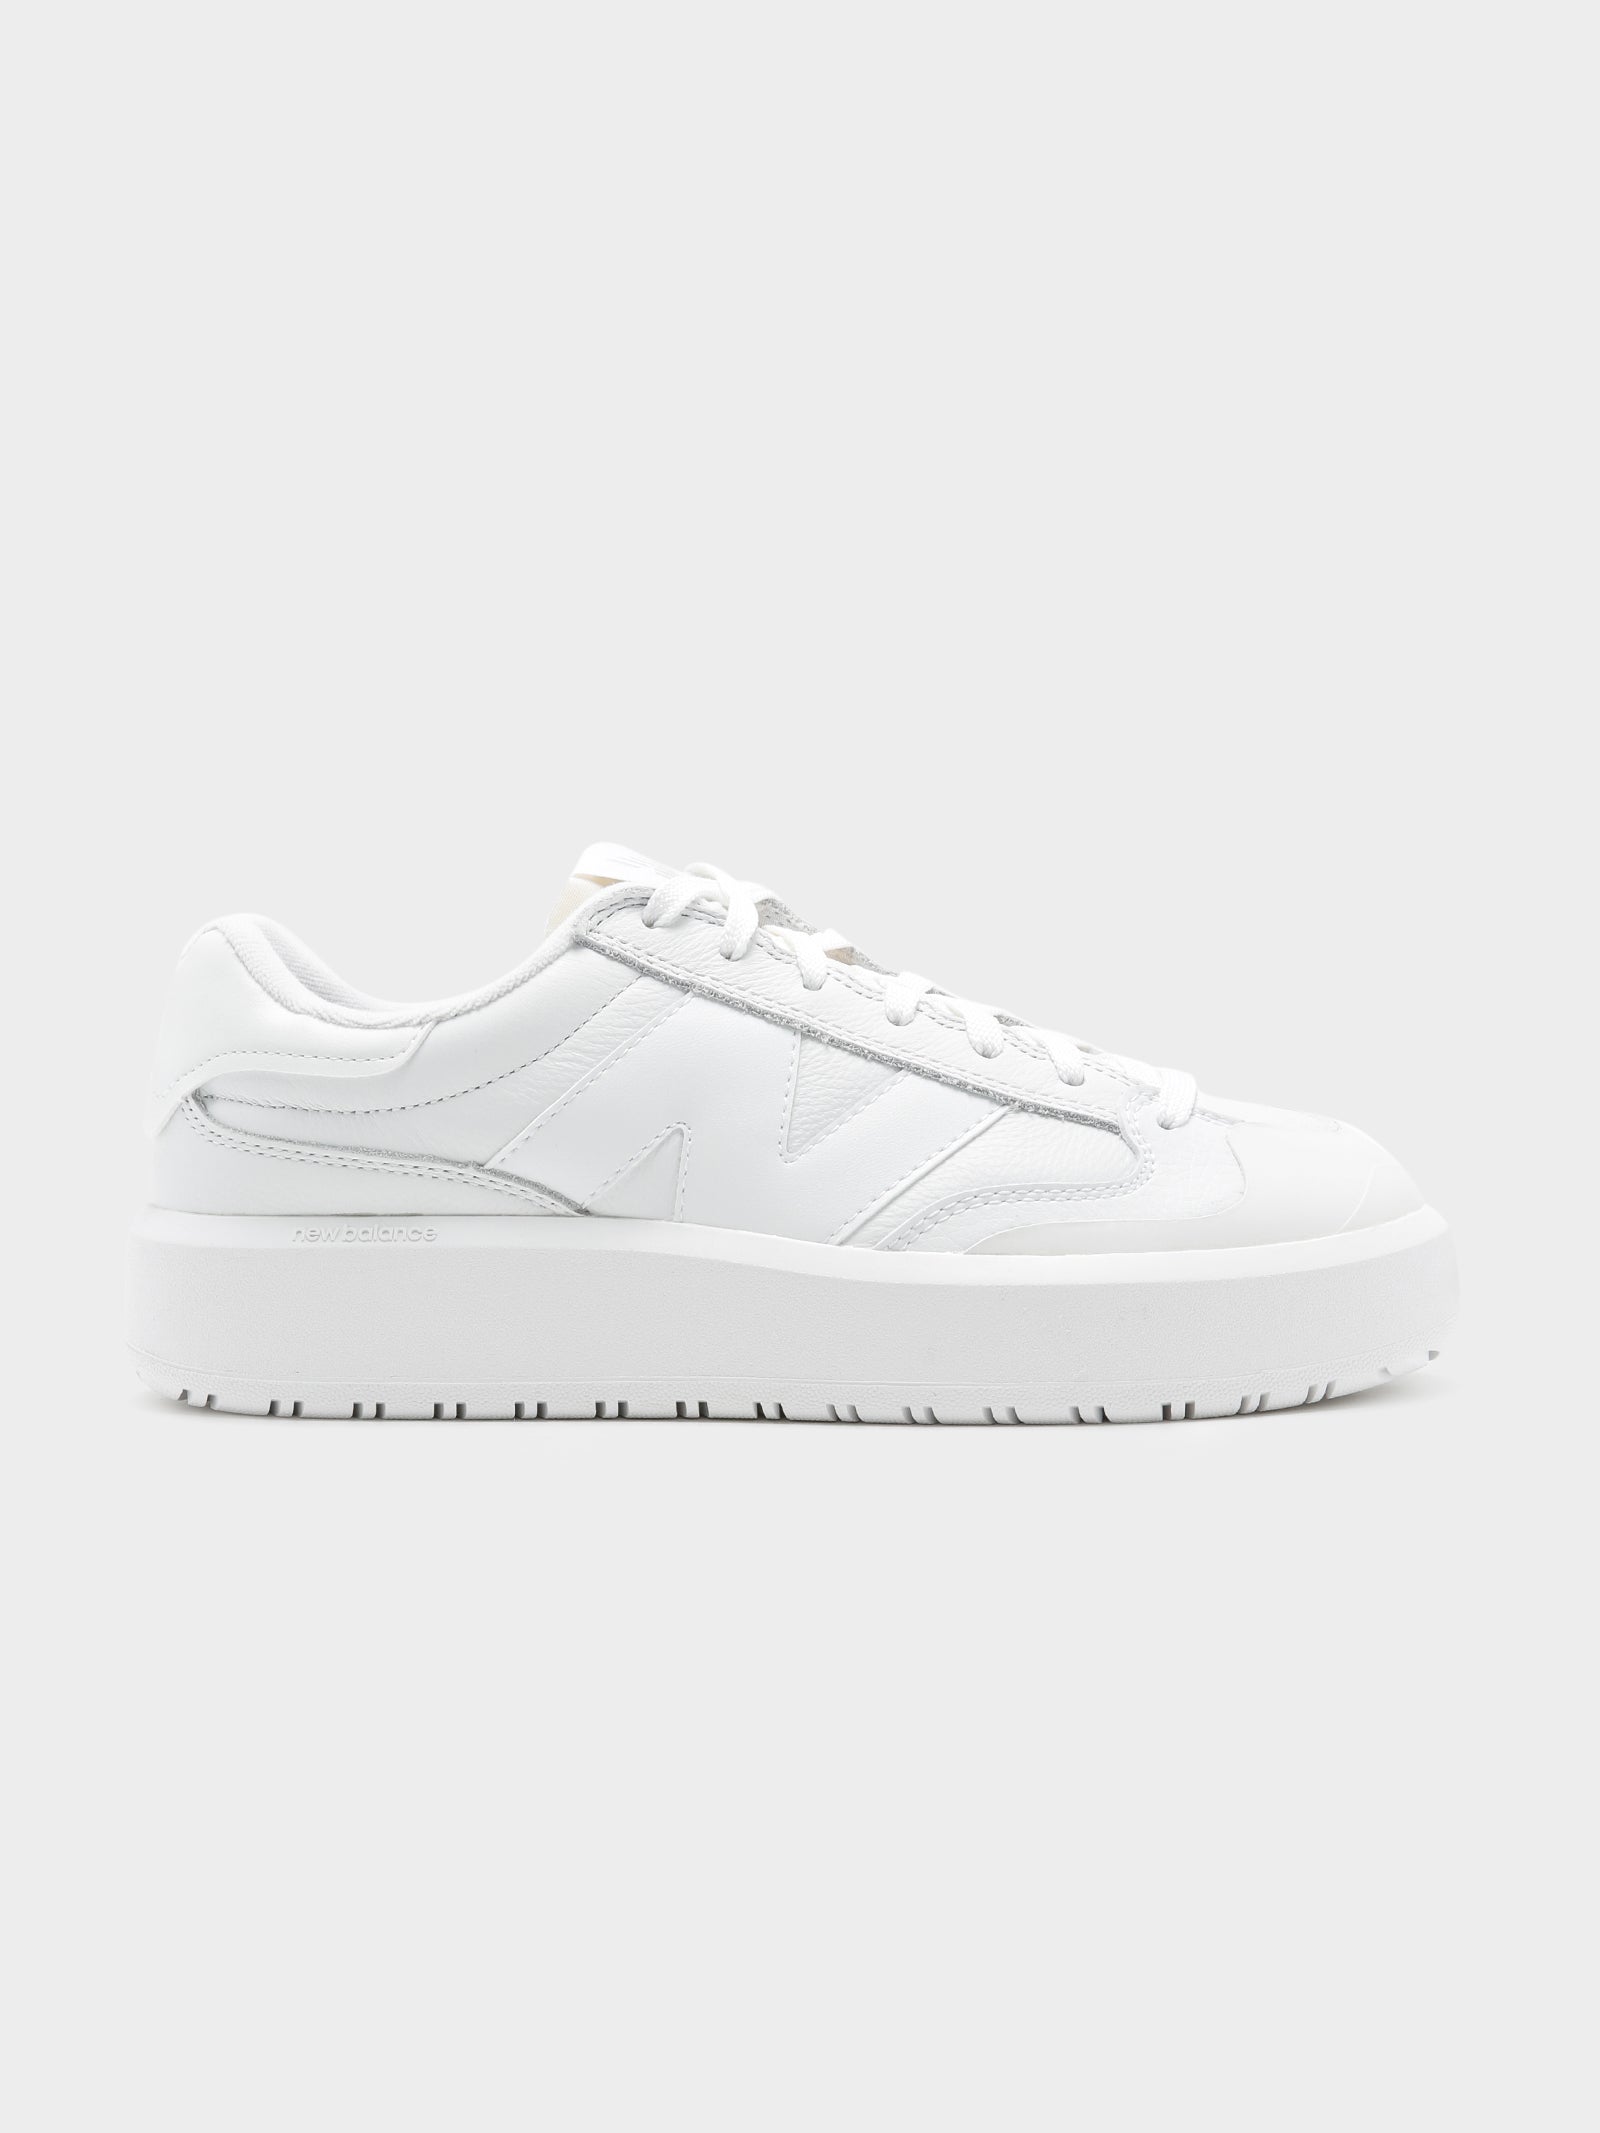 Unisex CT302 Sneakers in White - Glue Store